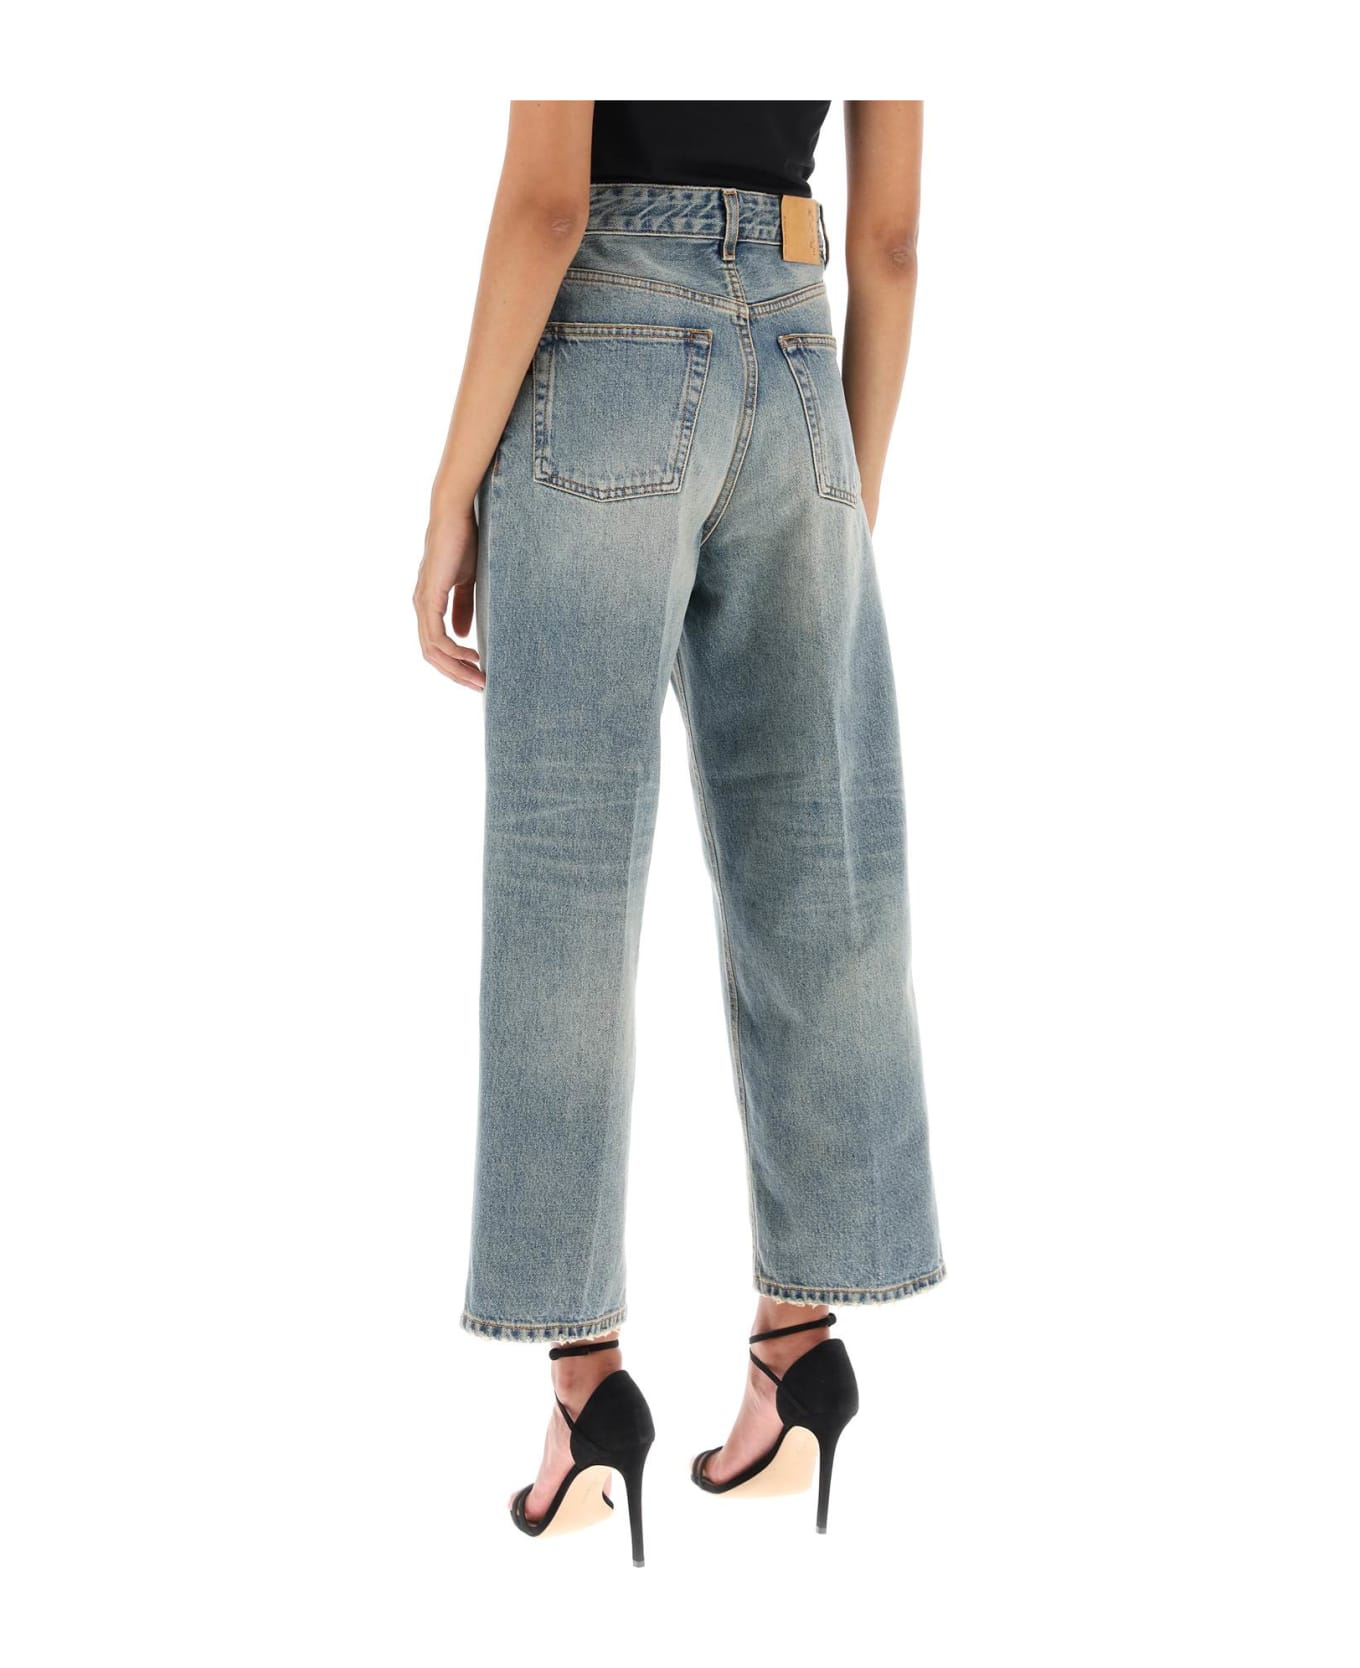 Haikure 'betty' Cropped Jeans With Straight Leg - DIRTY BLUE (Light blue)